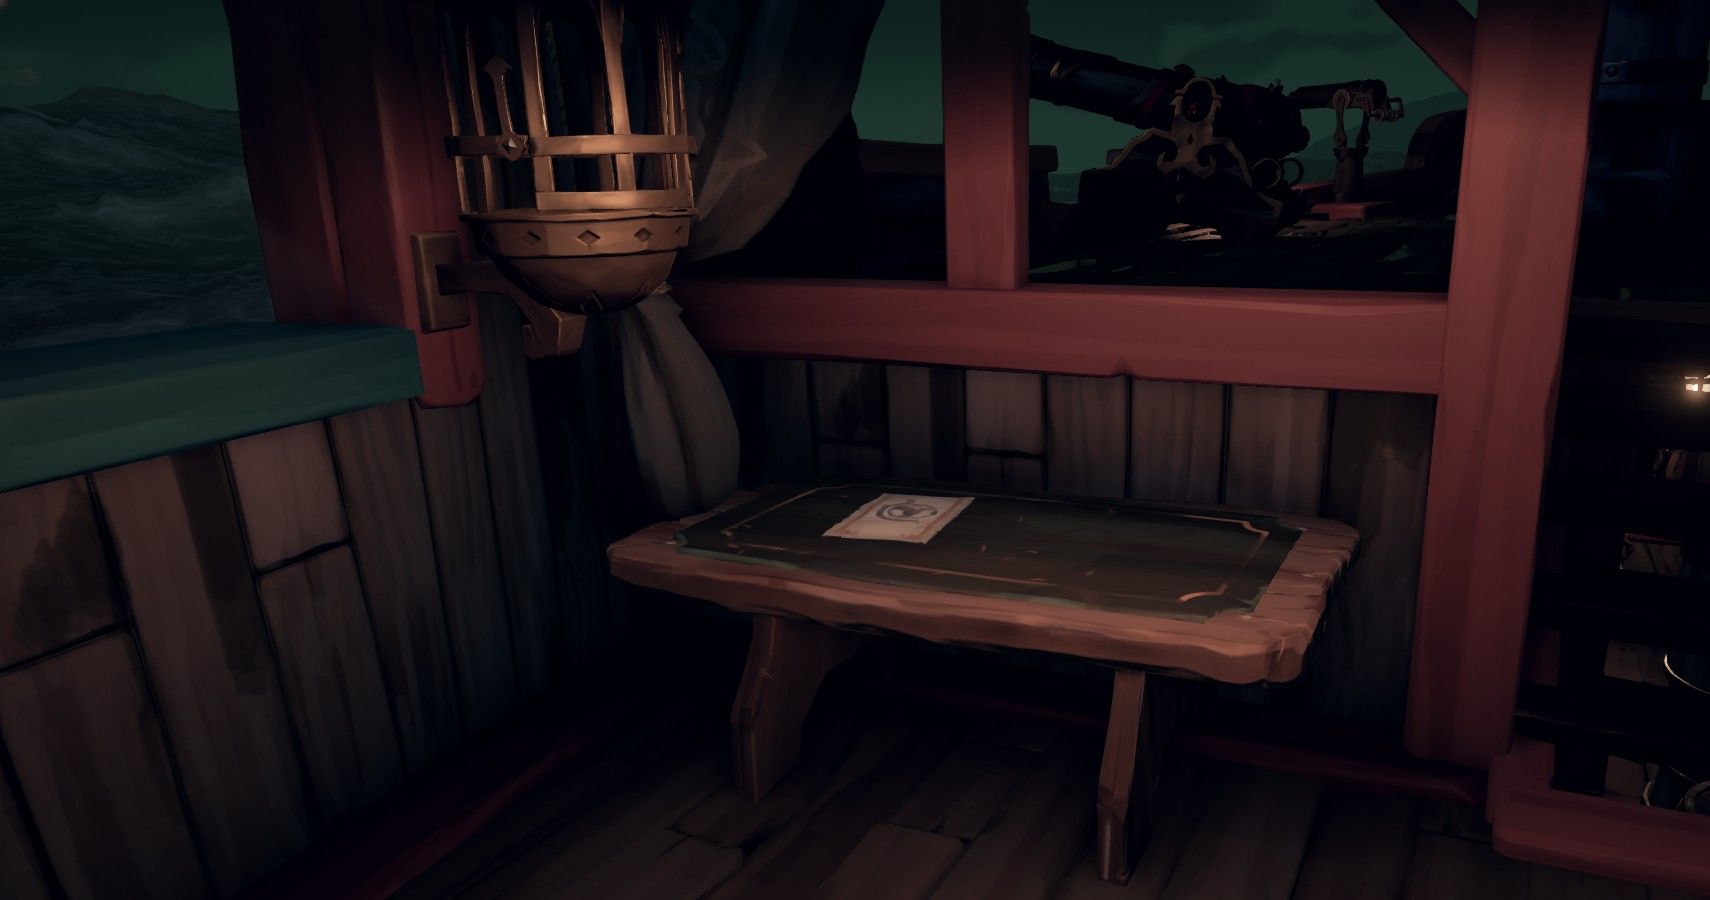 Sea Of Thieves How To Complete All Novice Trials Of Adventure